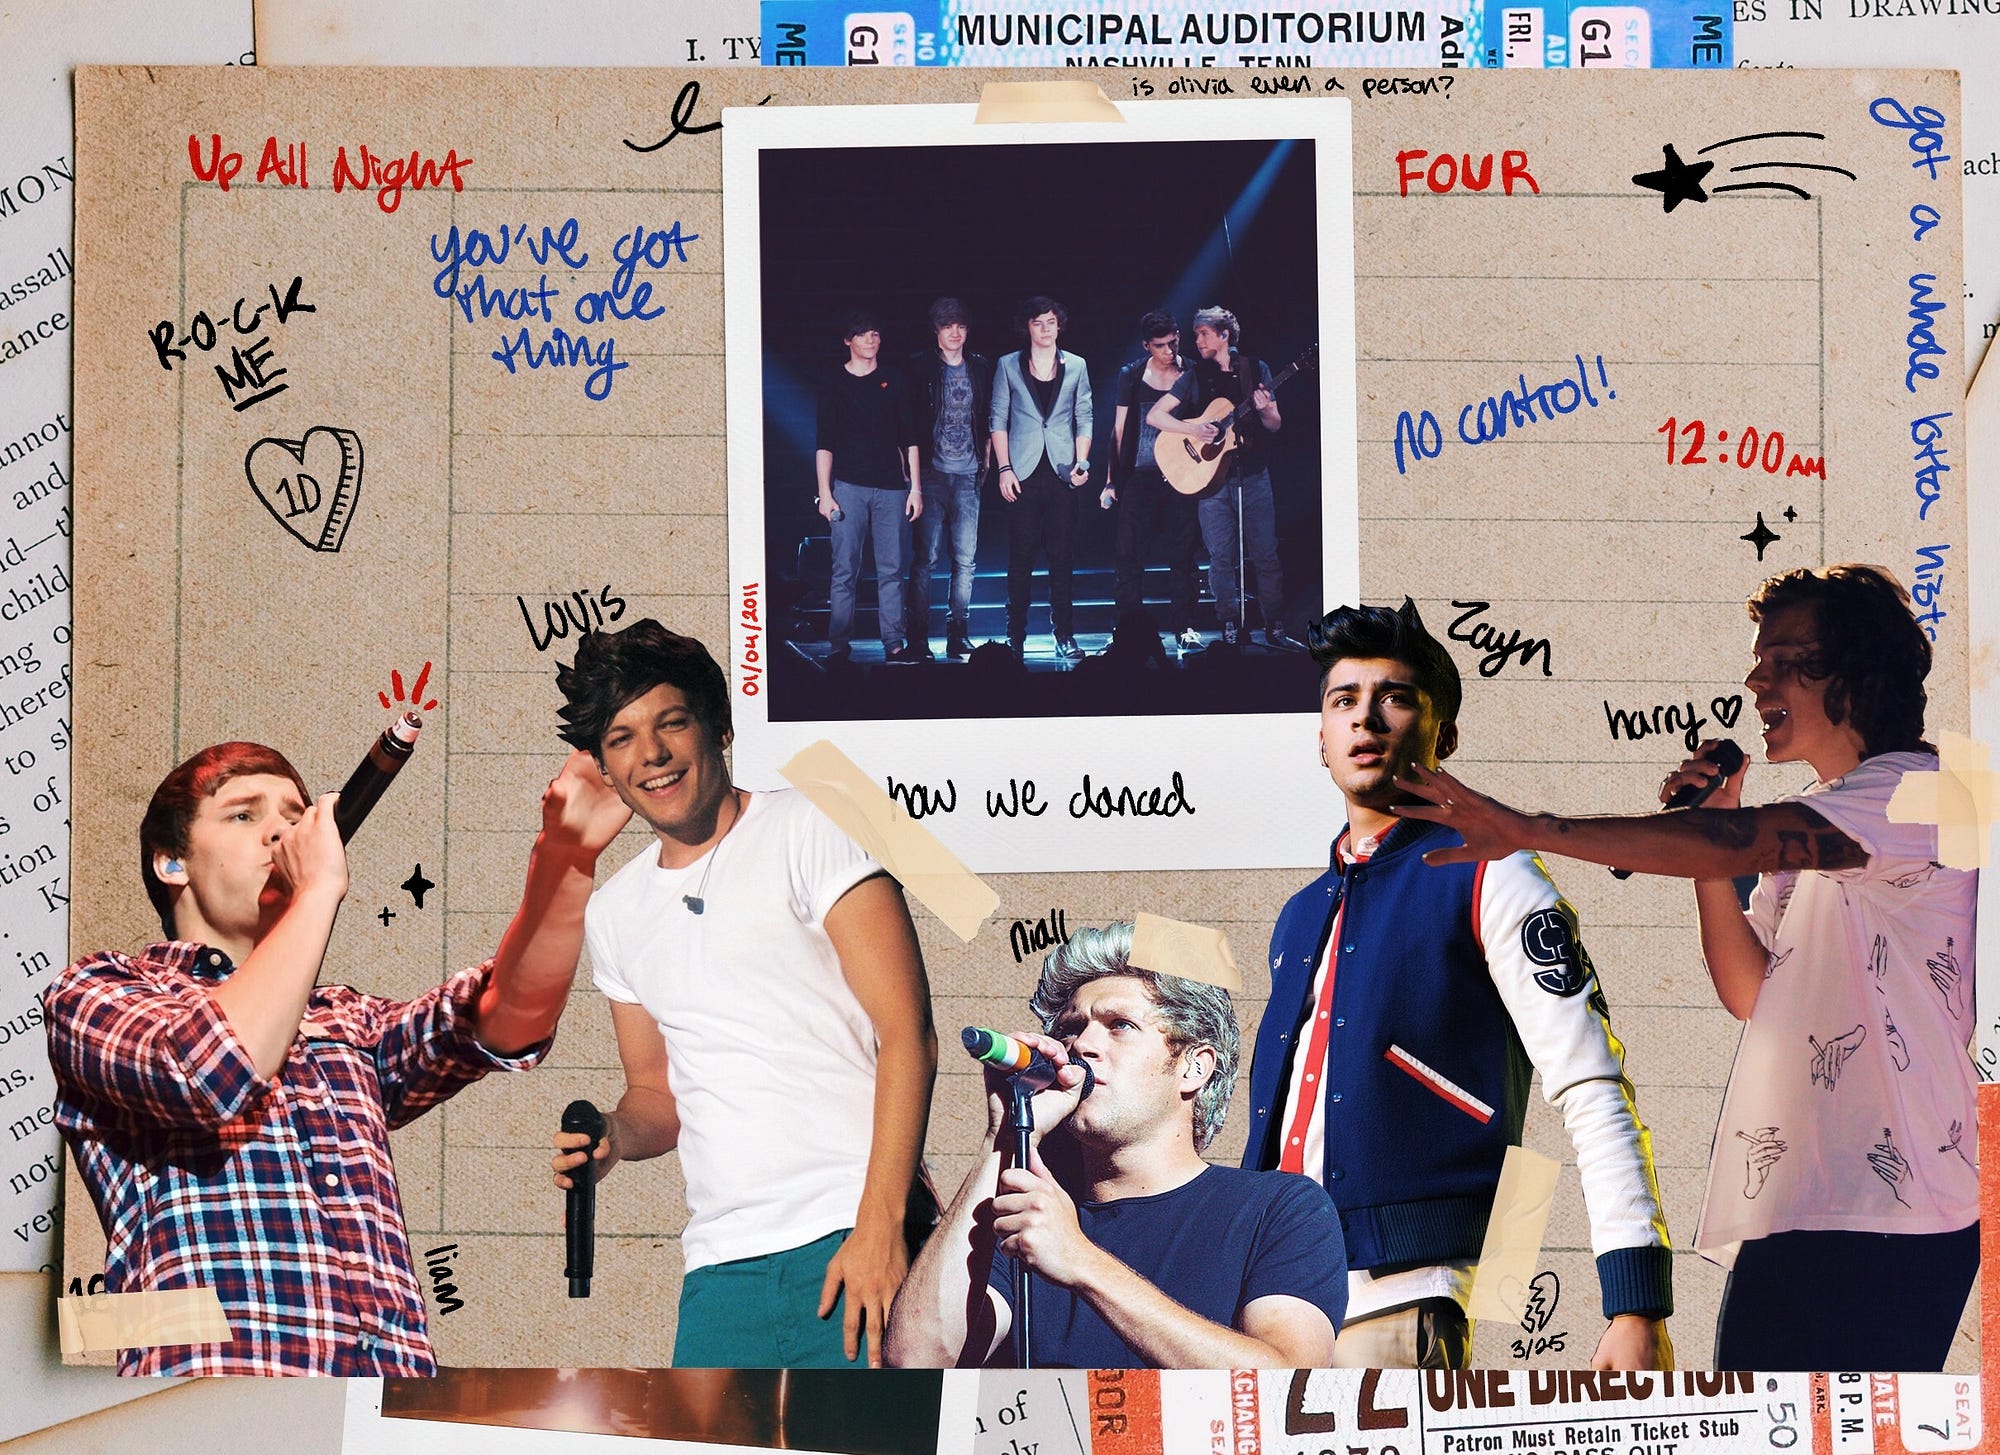 All 91 One Direction songs, ranked, by Julianna Ress